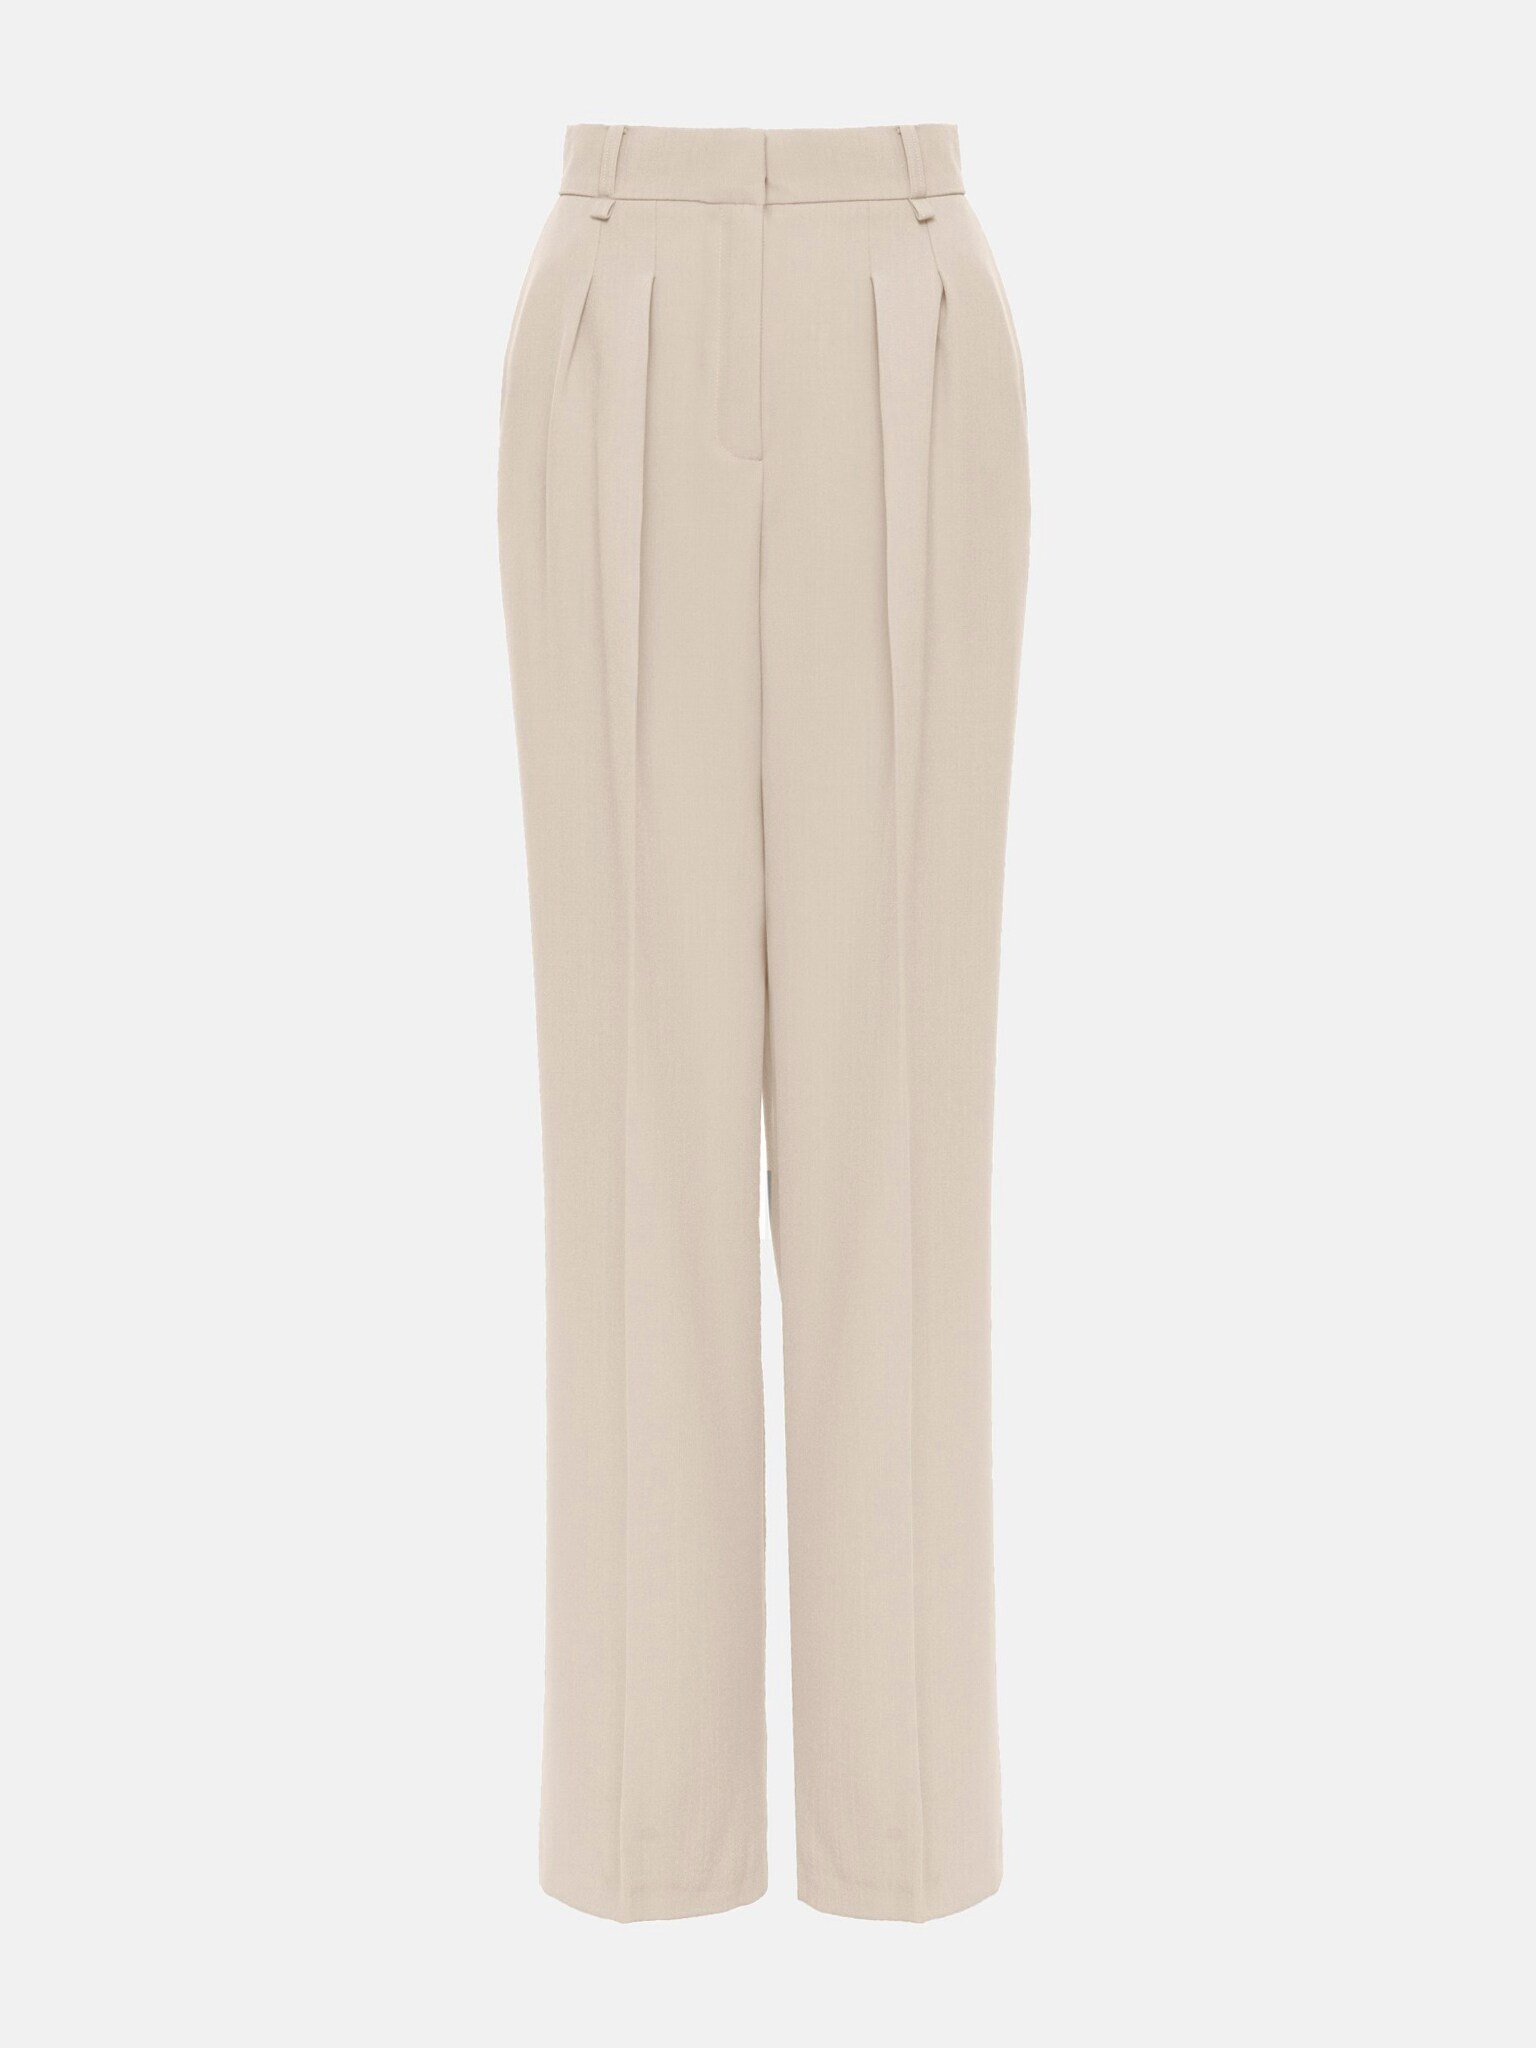 Pleated palazzo pants with creases :: LICHI - Online fashion store